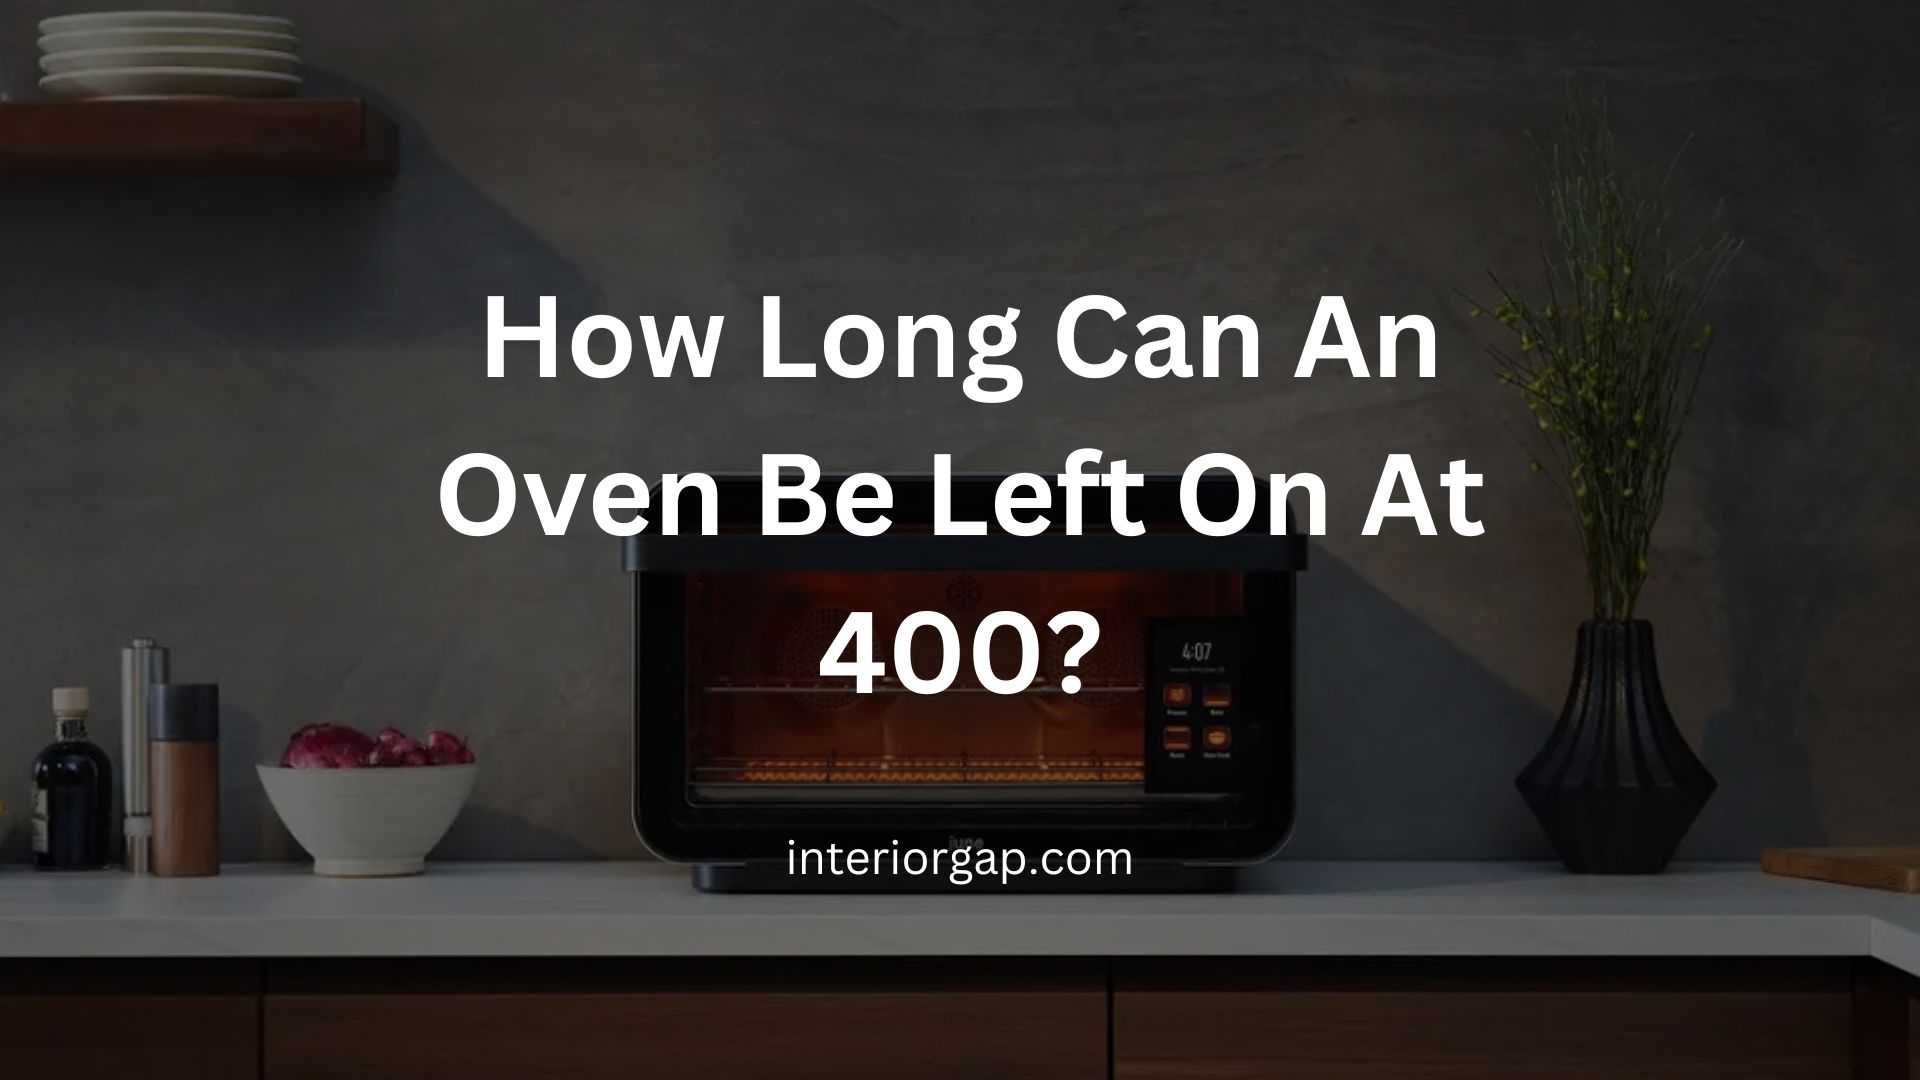 How Long Can An Oven Be Left On At 400?